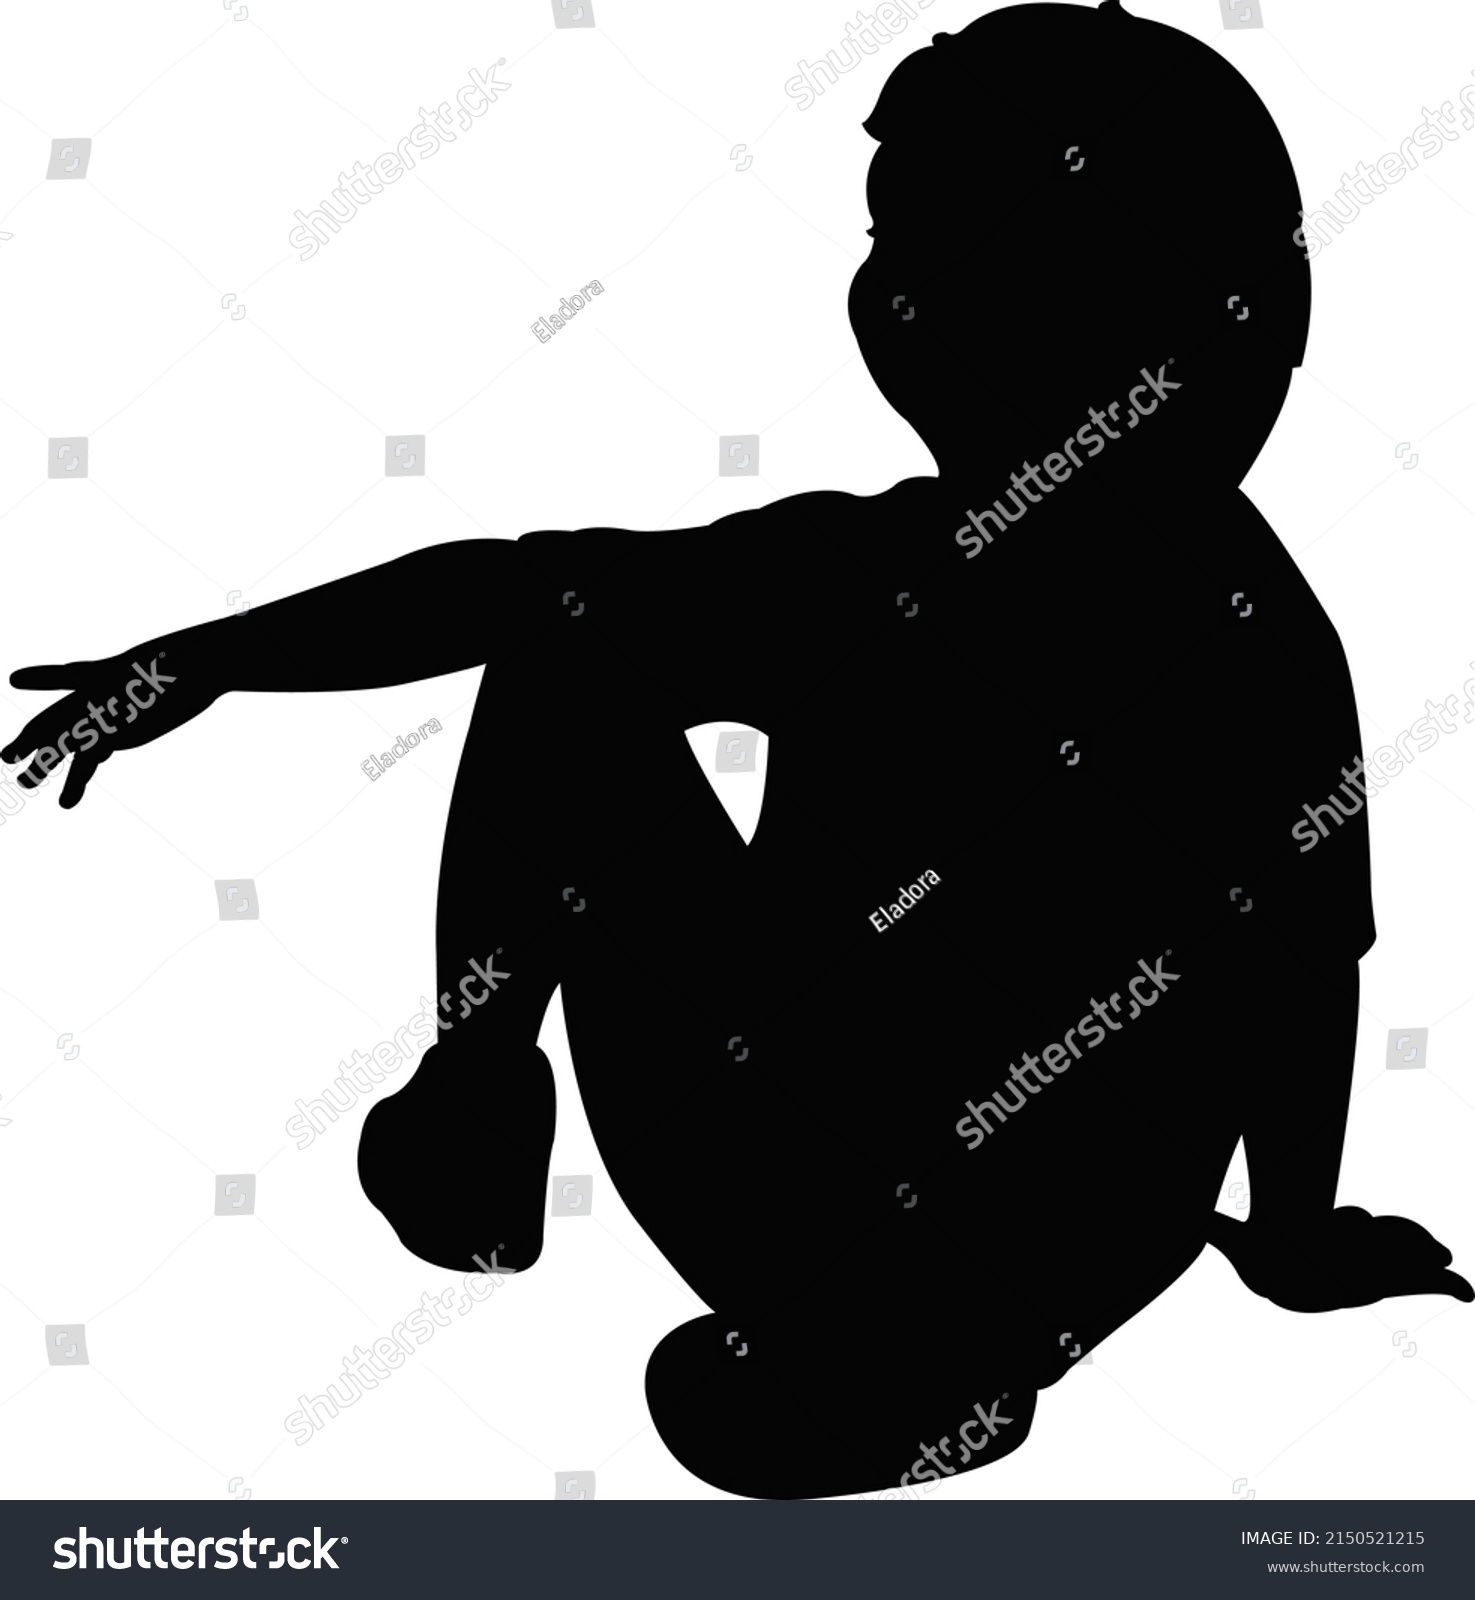 Child Sitting Body Silhouette Vector Stock Vector (Royalty Free ...